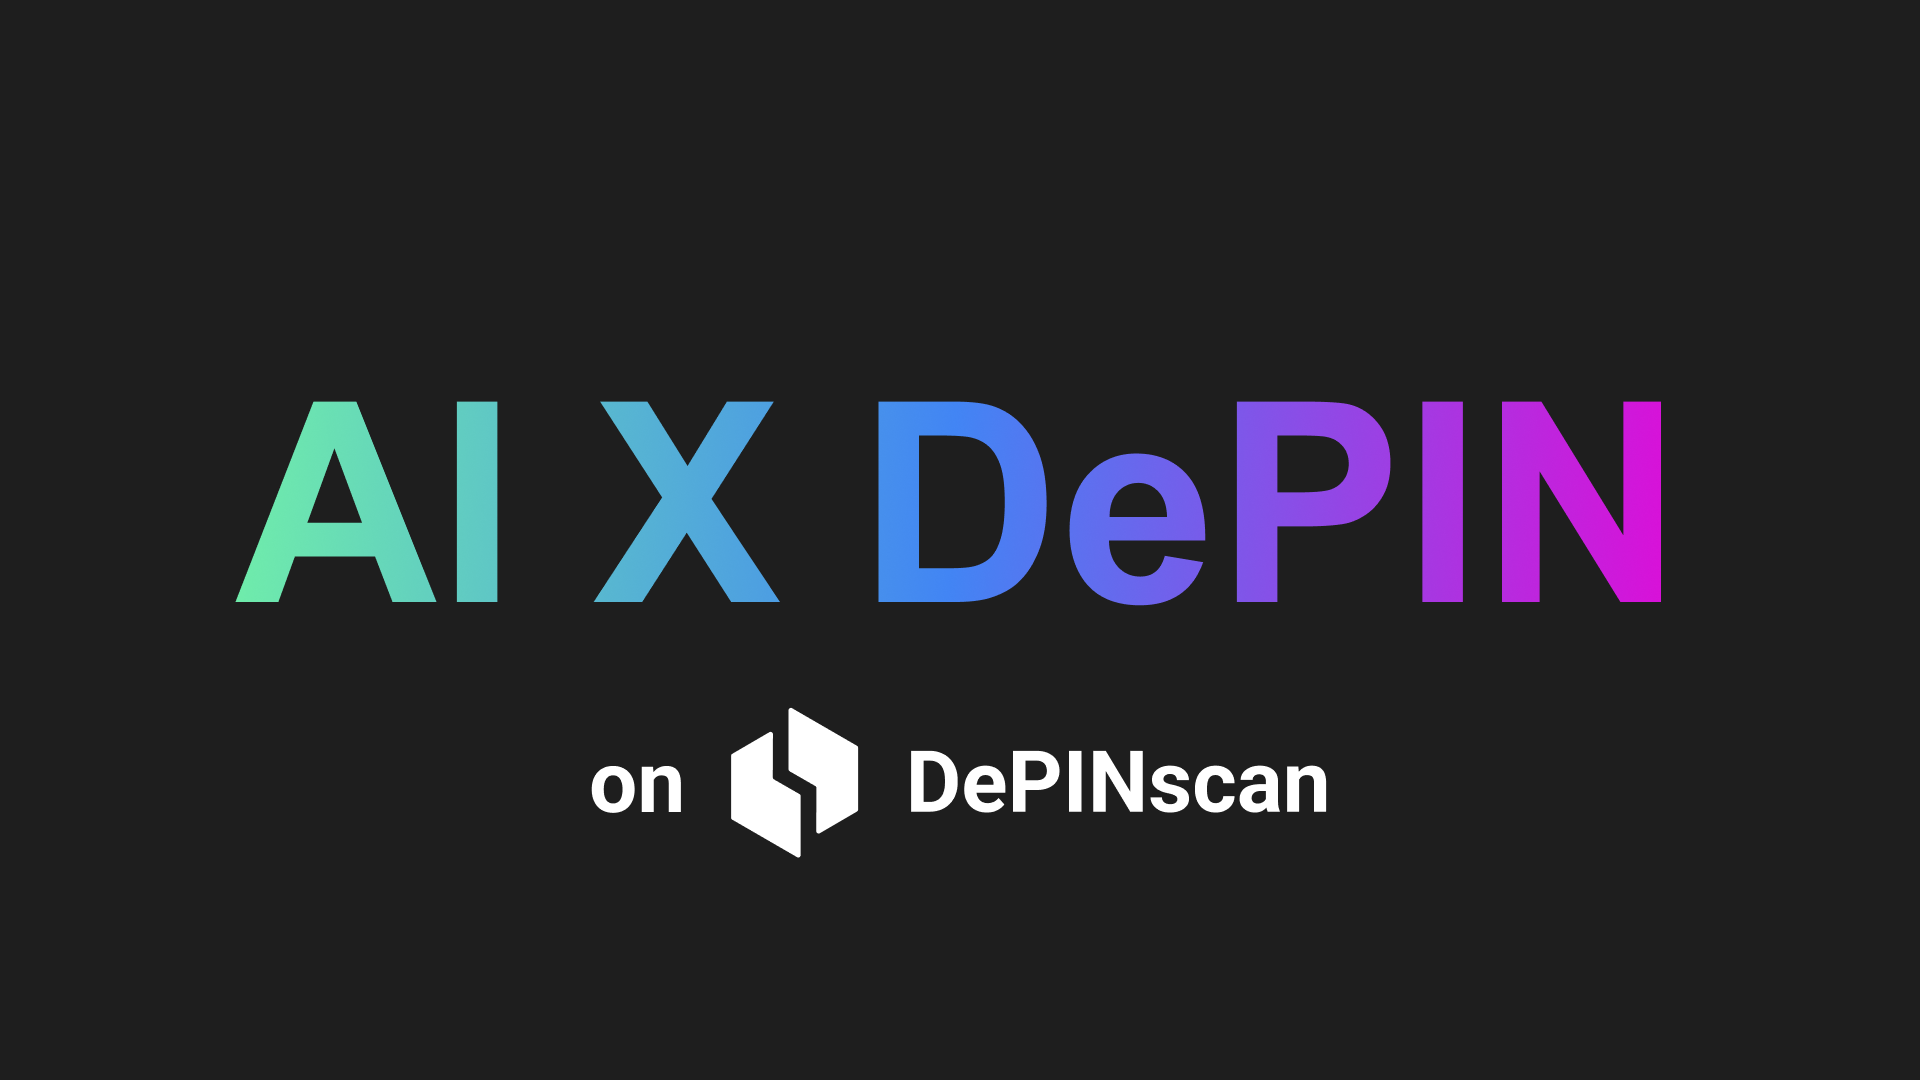 now-tracking-on-depinscan-ai-x-depin